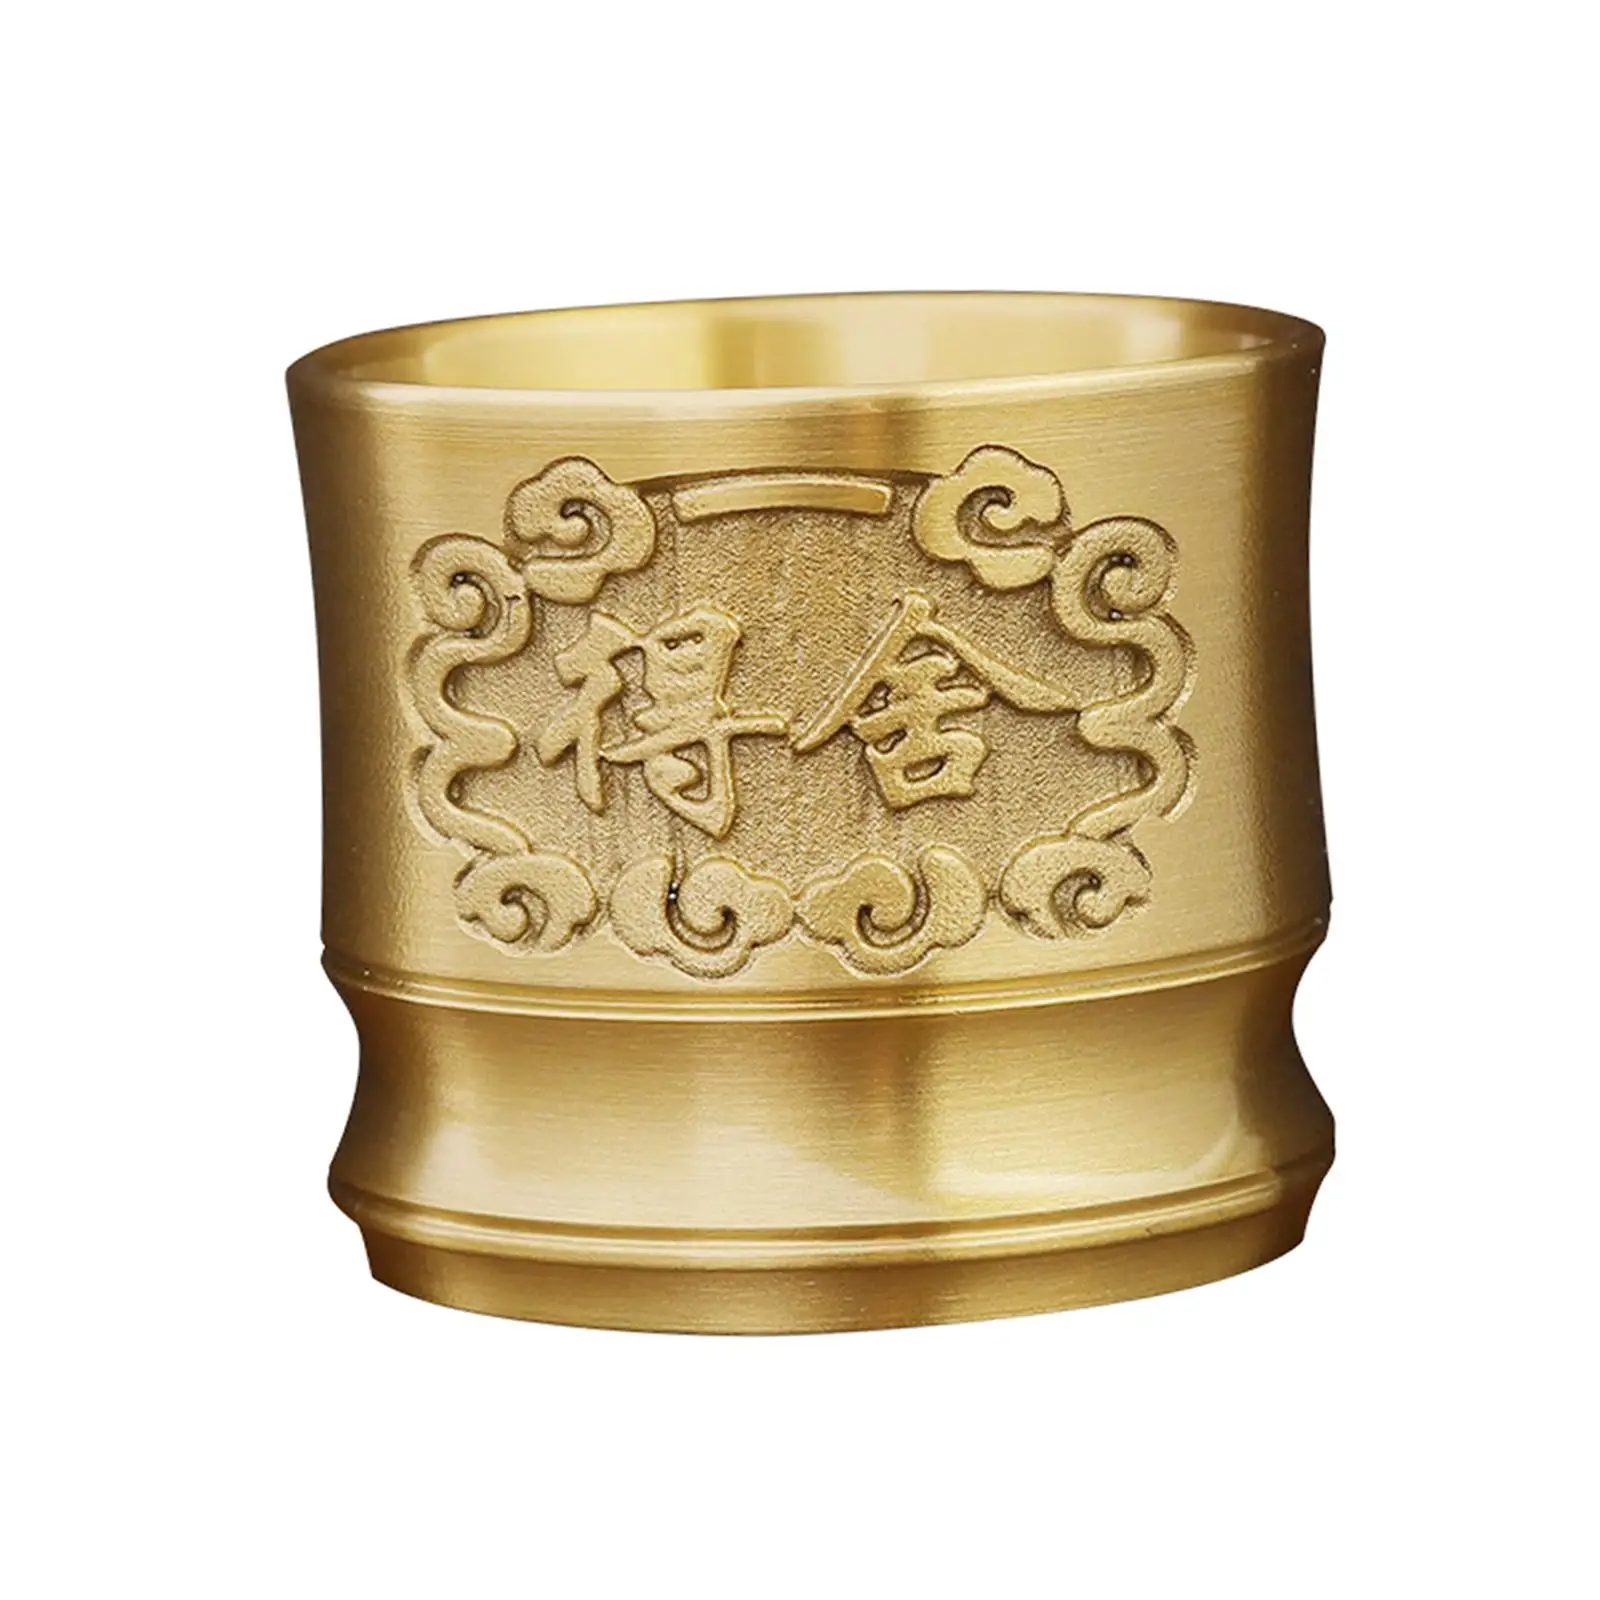 Brass Cup Engraved Drinking Cup Teacup for Desk Decoration Holiday Gift